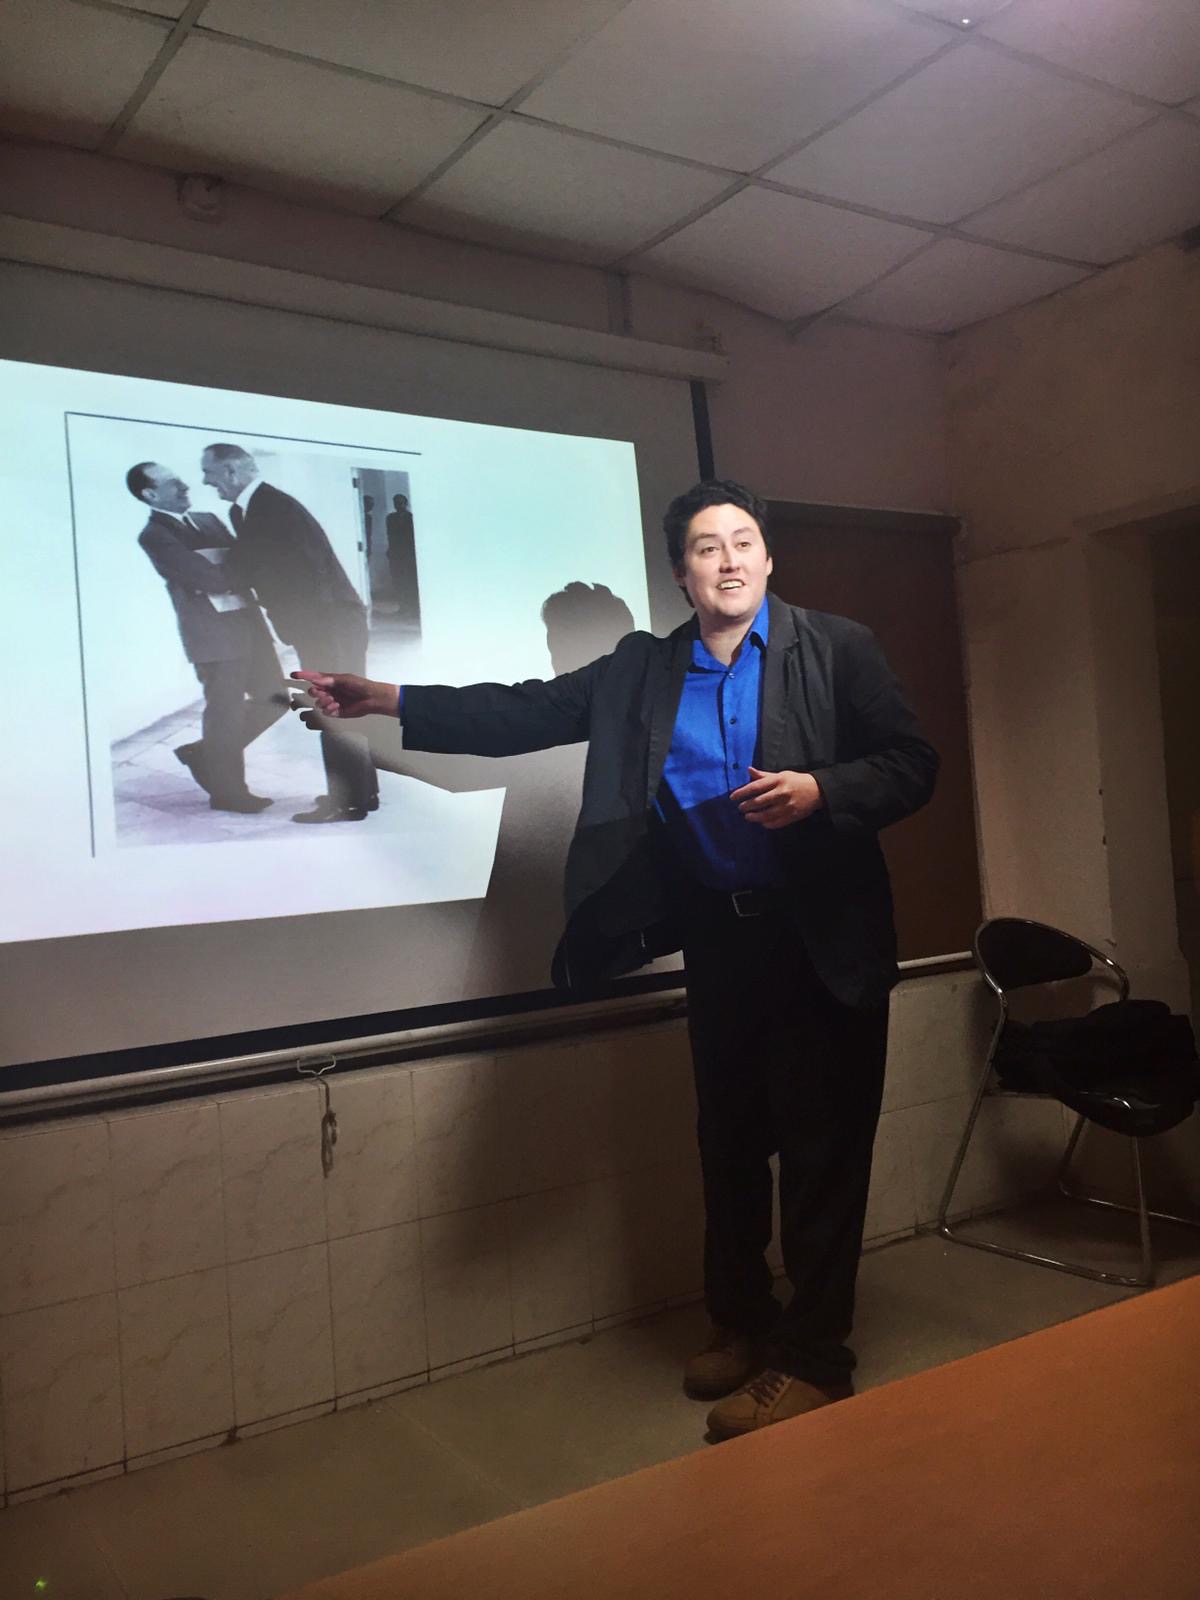 Pic of Marc elivering a lecture at Ambedkar University Delhi (located in New Delhi) about U.S. food aid to India during the 1960s